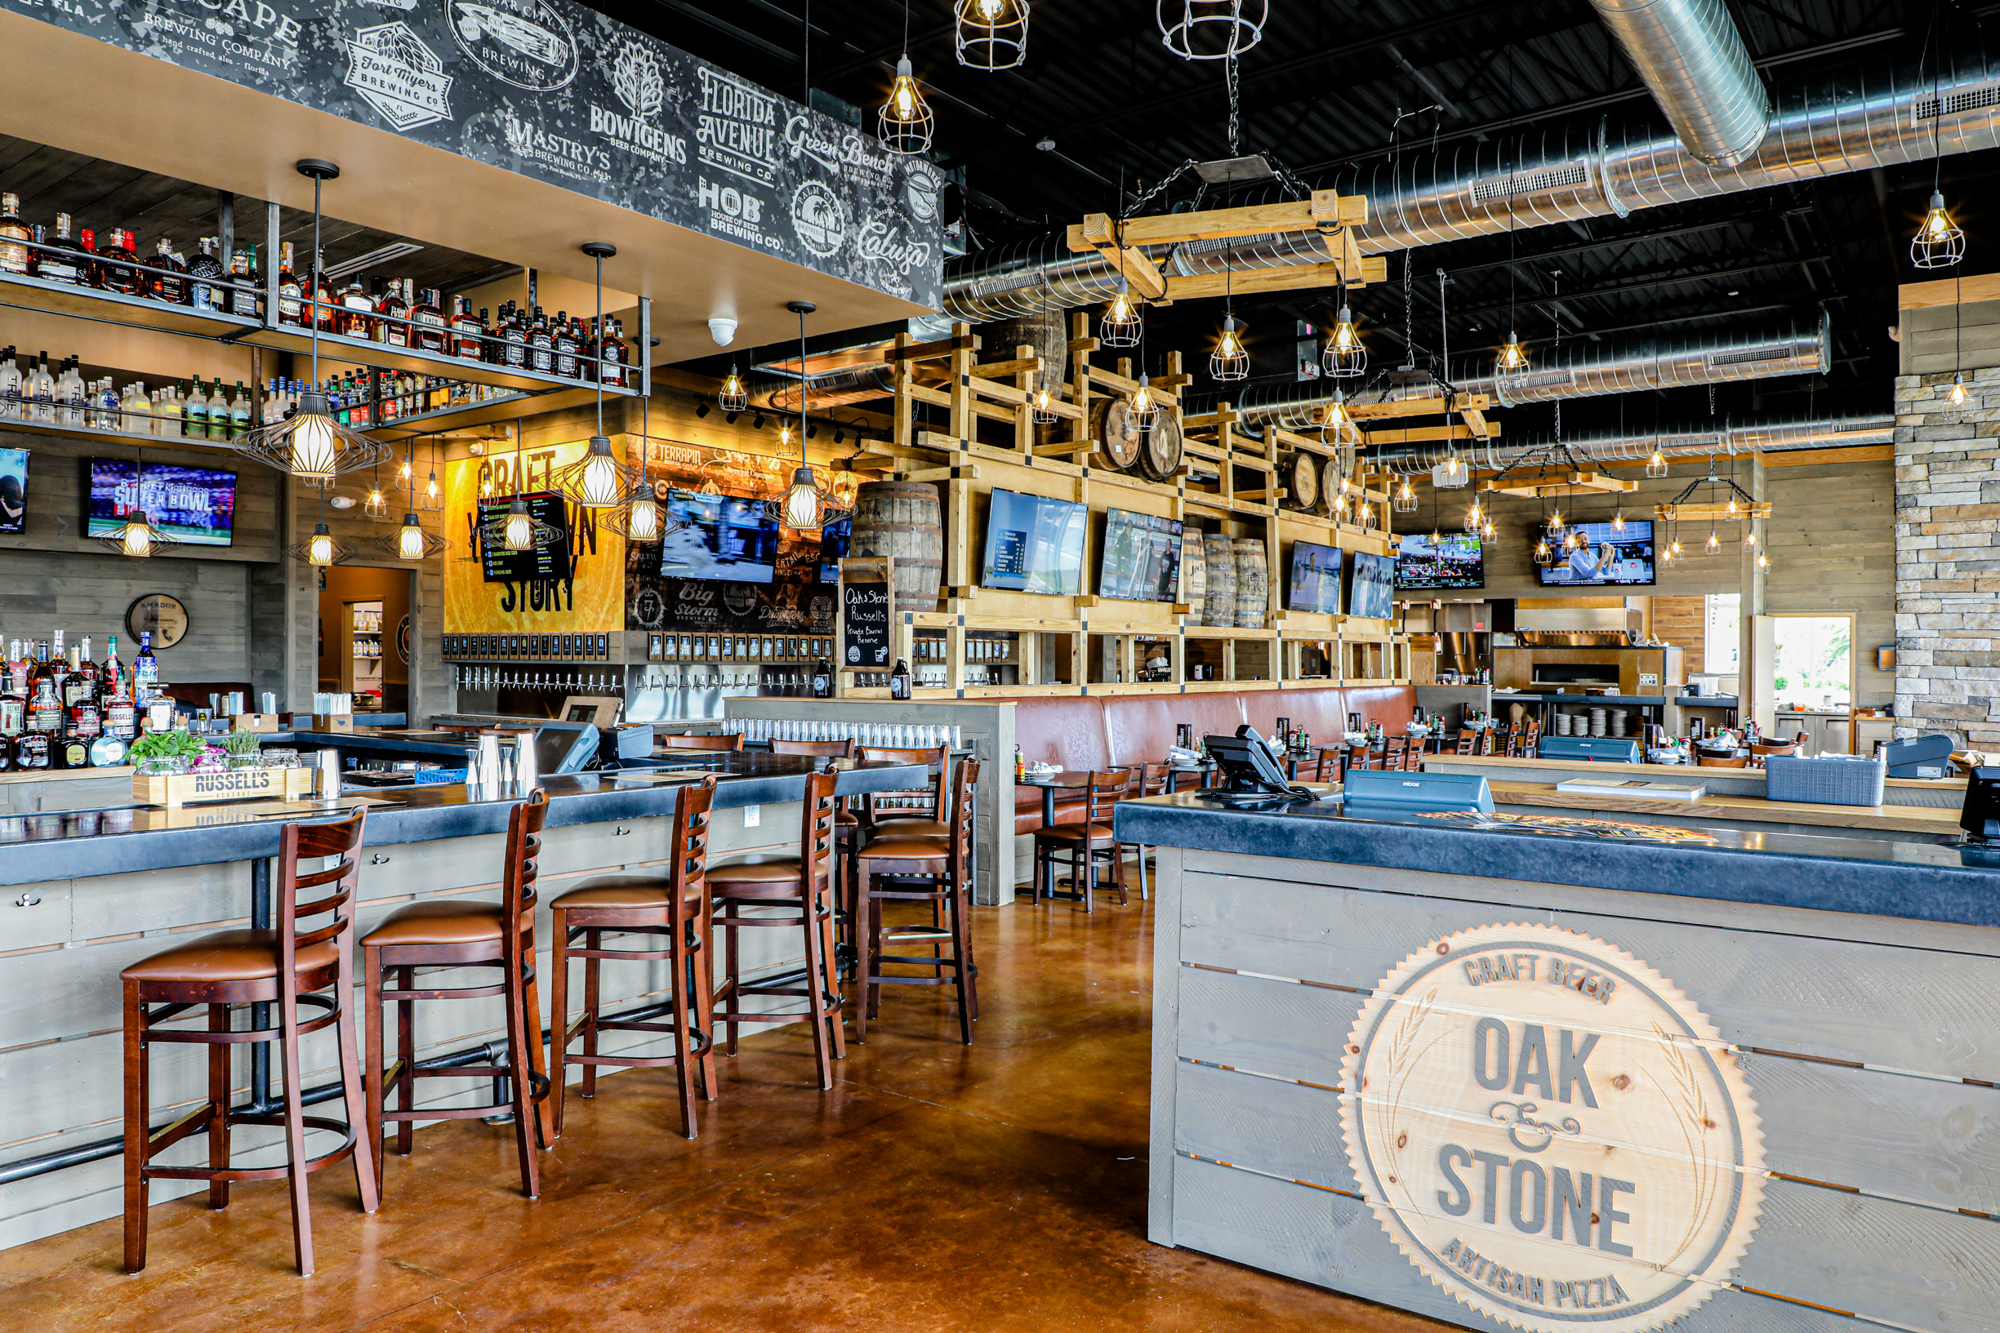 Rodrigo Mendez. Oak & Stone in Naples has a 5,300-square-foot standalone restaurant with a 1,600-square-foot outdoor patio for pet-friendly al fresco dining.